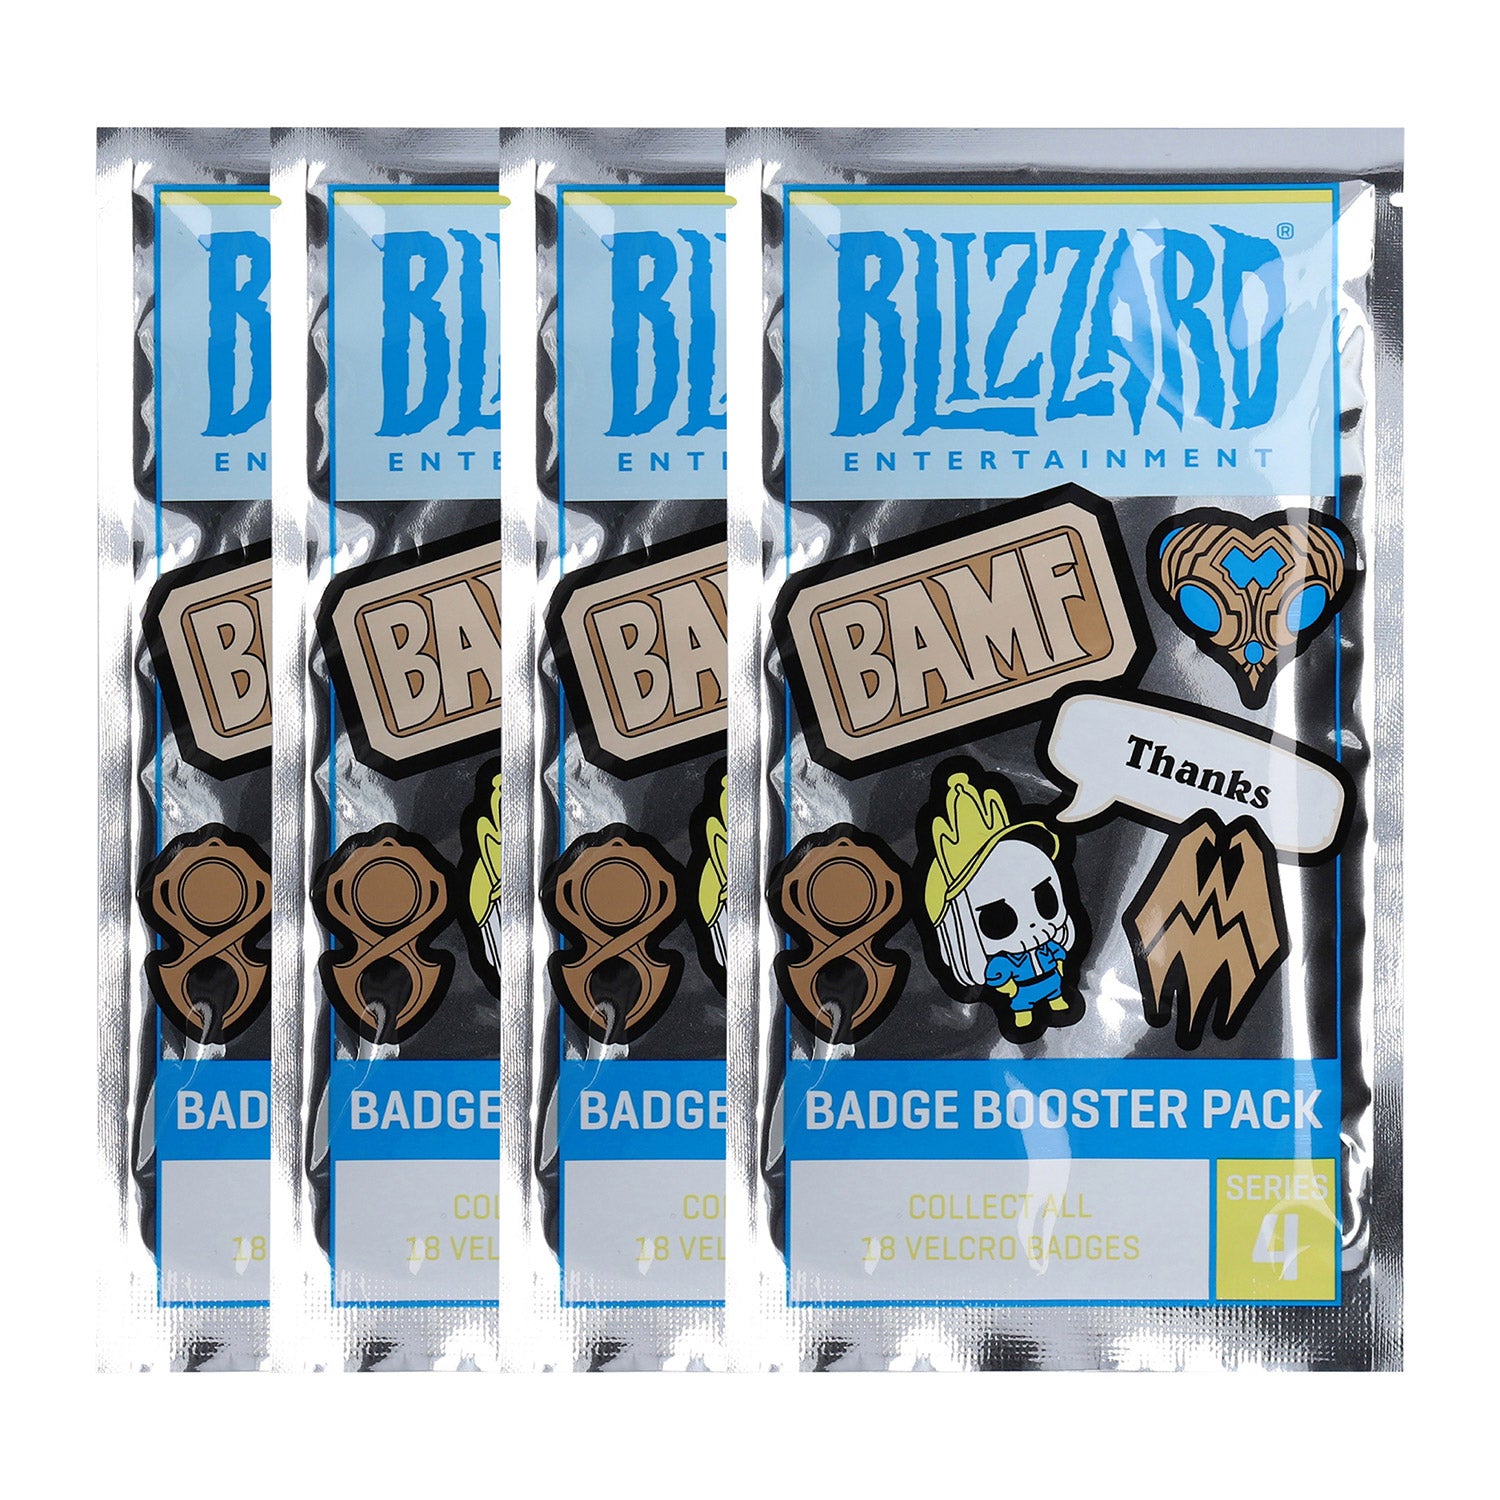 Blizzard Series 4 Blind Badge Booster 4-Pack Bundle in Blue - Front View